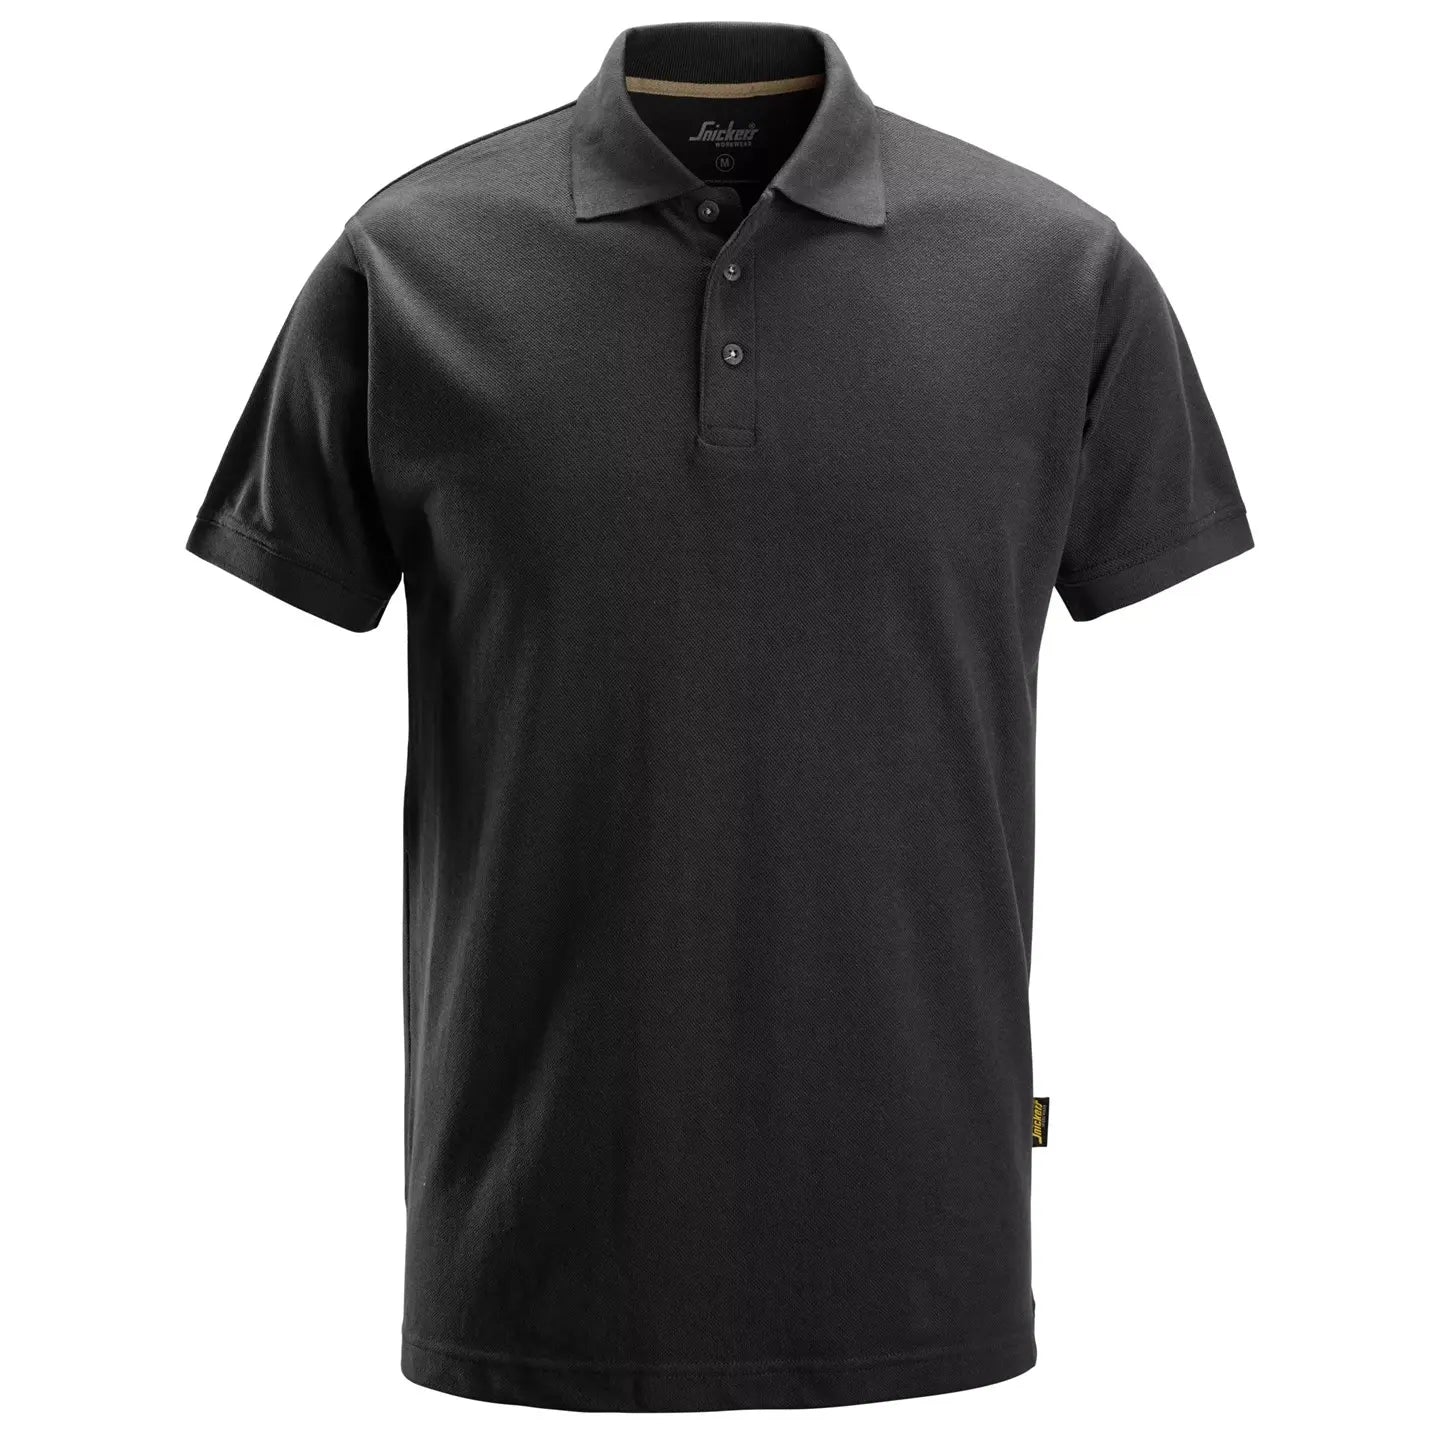 SNICKERS 2718 KLASSISK POLO SHIRT